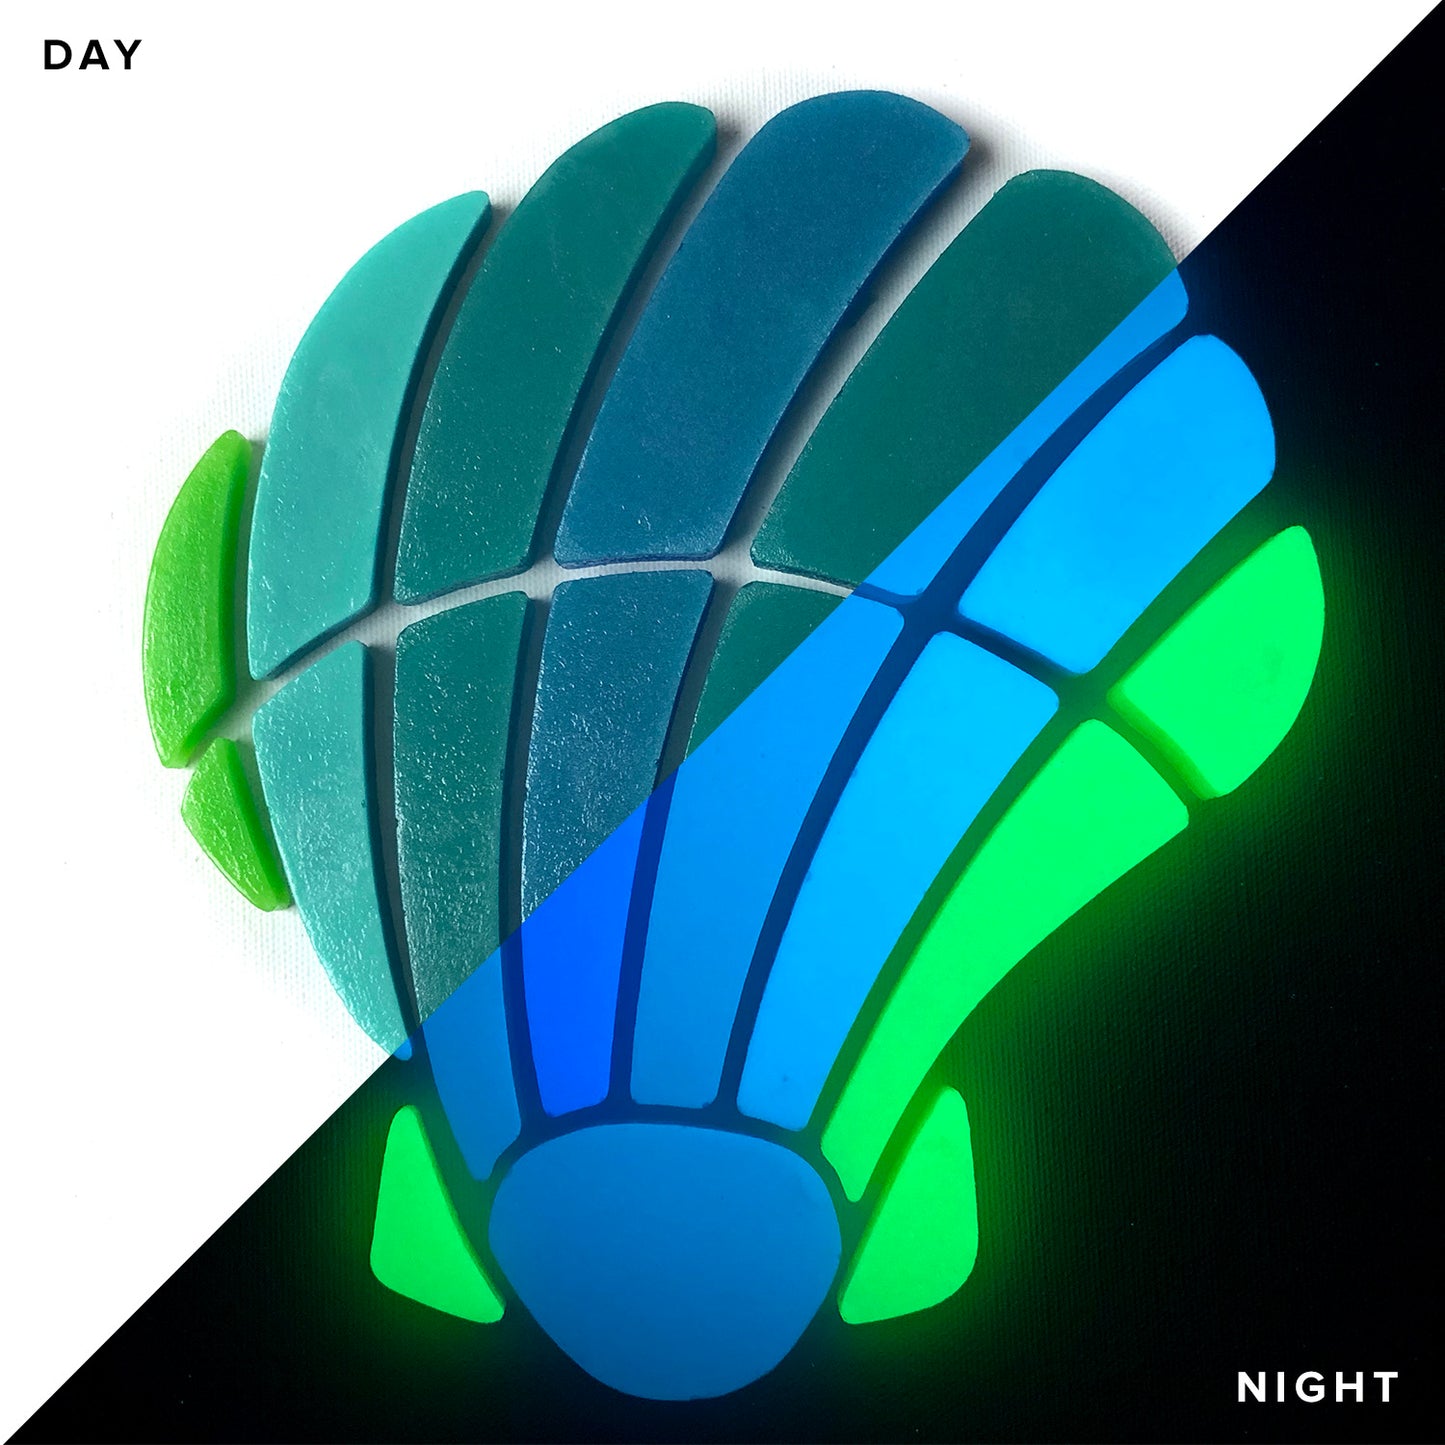 Curved Scallop Shell Family Glow-in-the-Dark Pool Mosaic